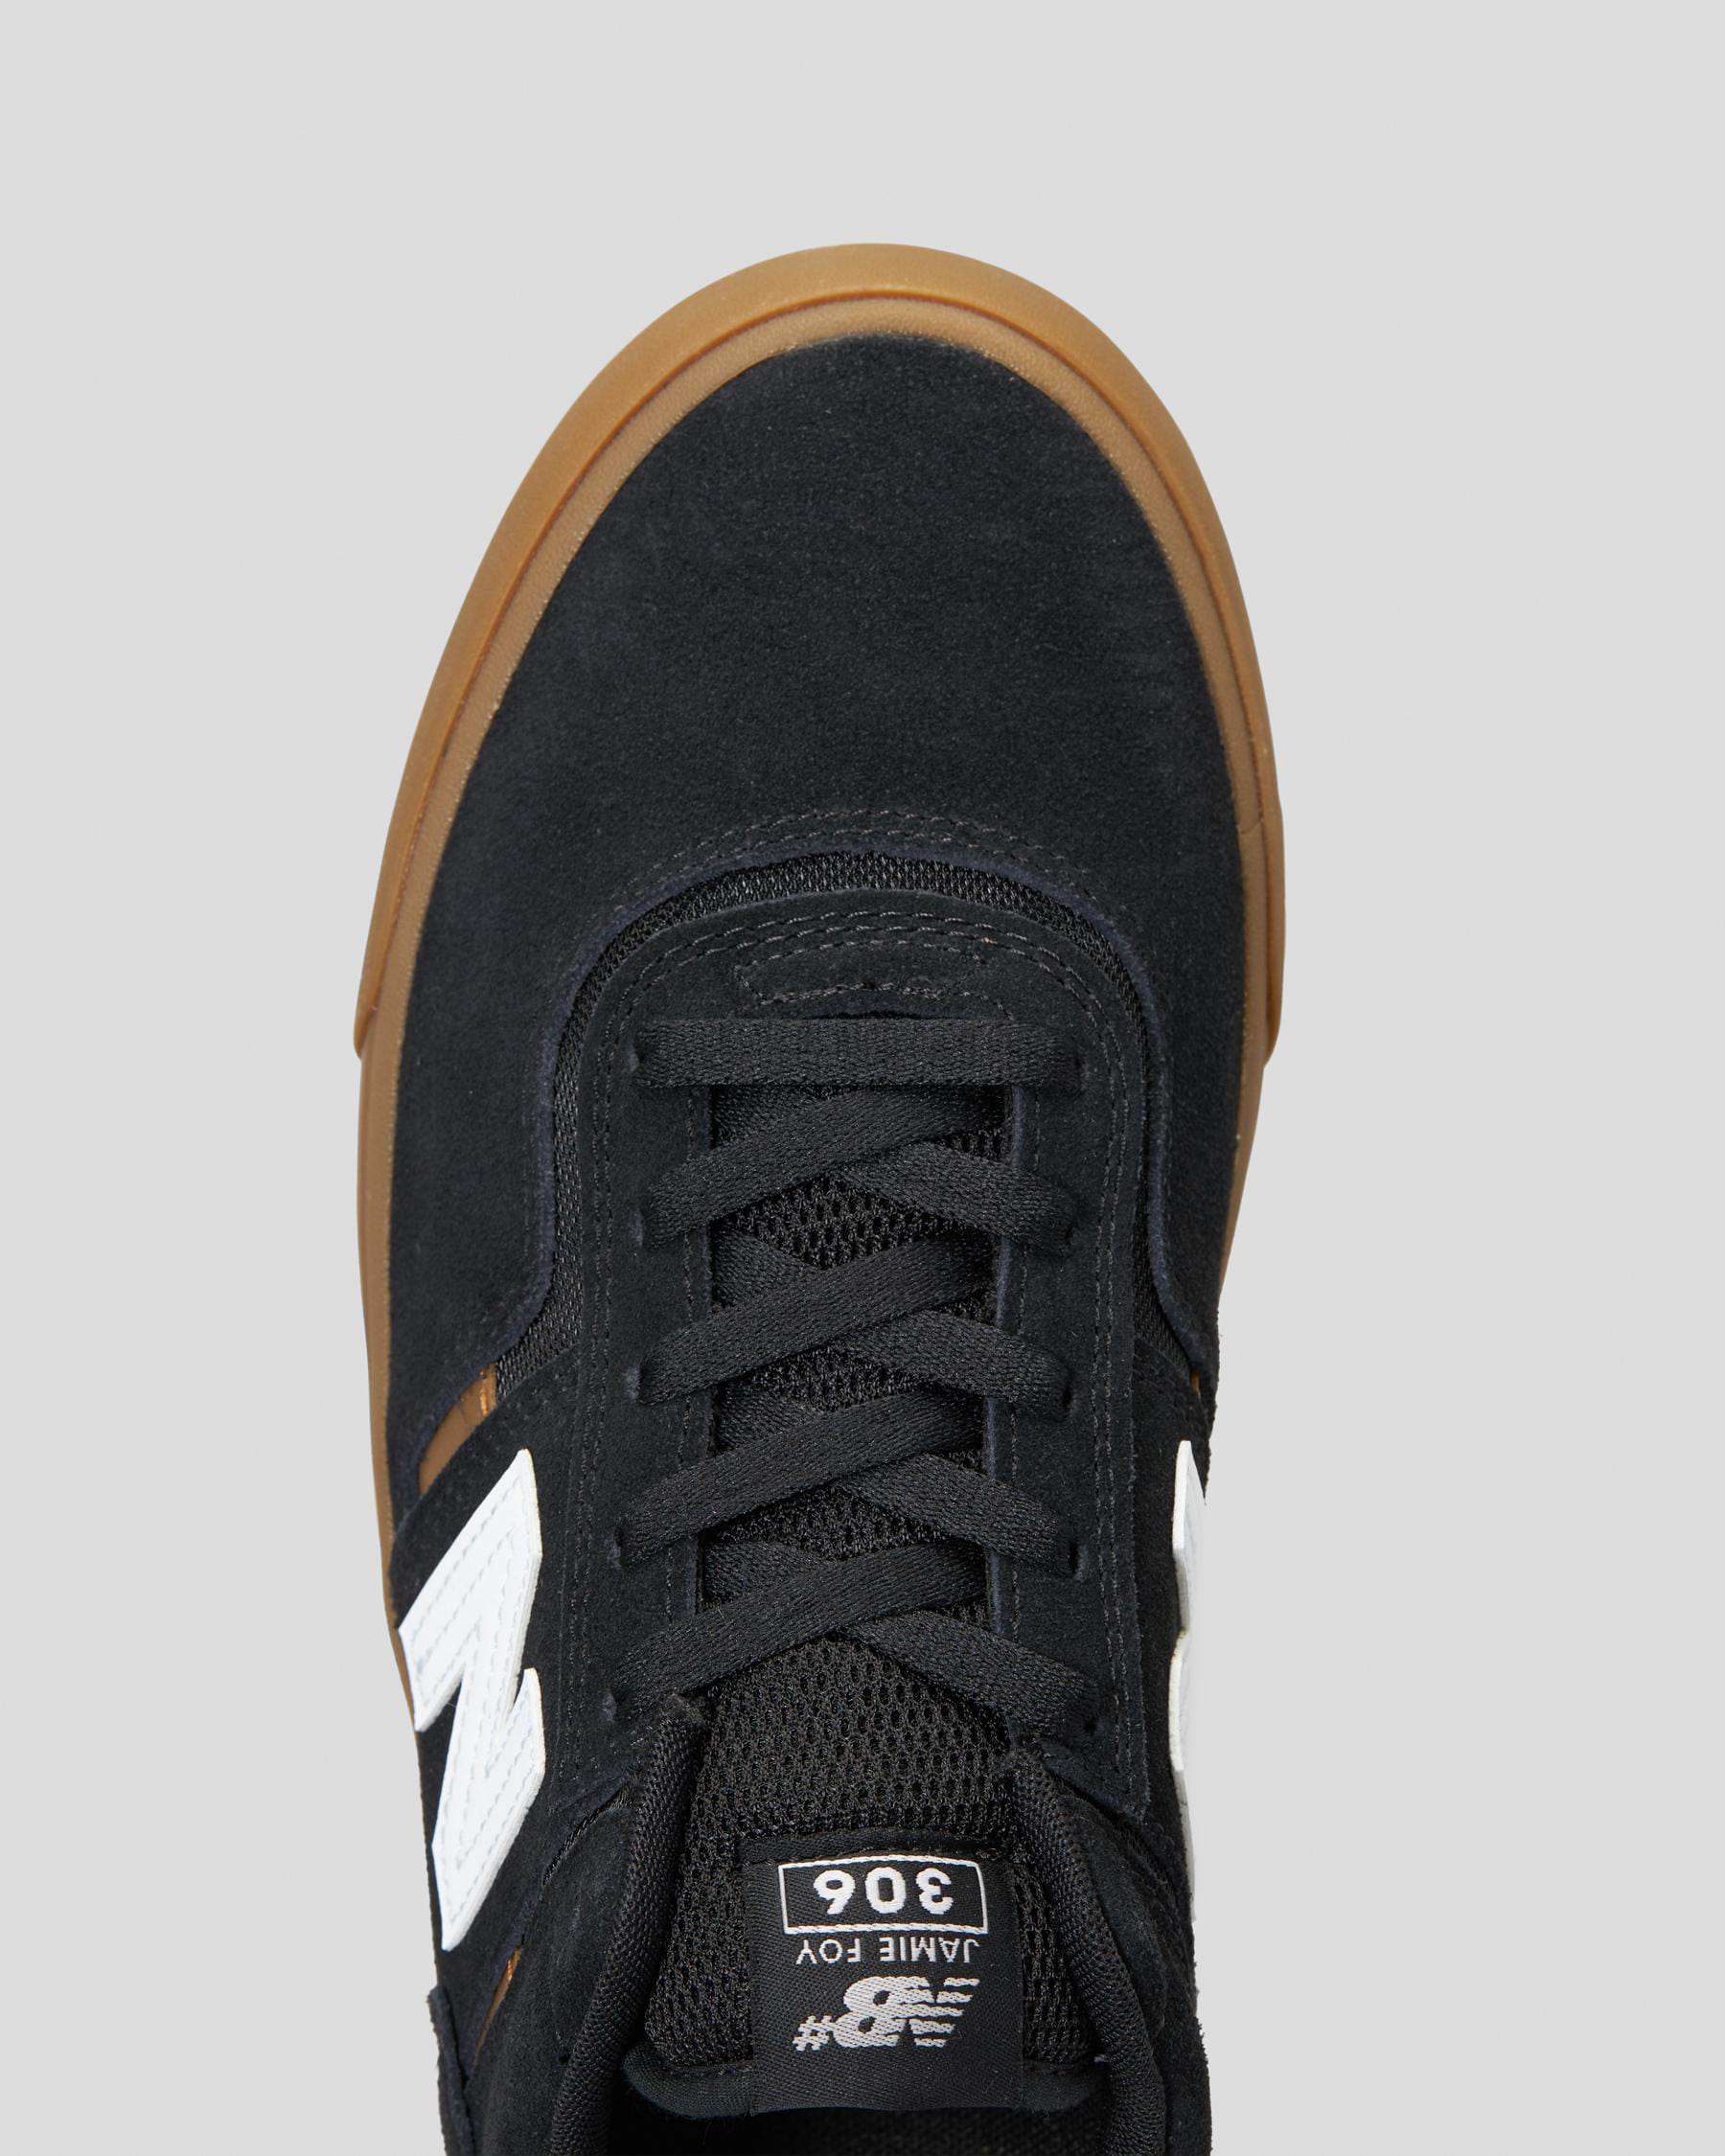 New Balance Nb 306 Shoes In Black/gum - Fast Shipping & Easy Returns ...